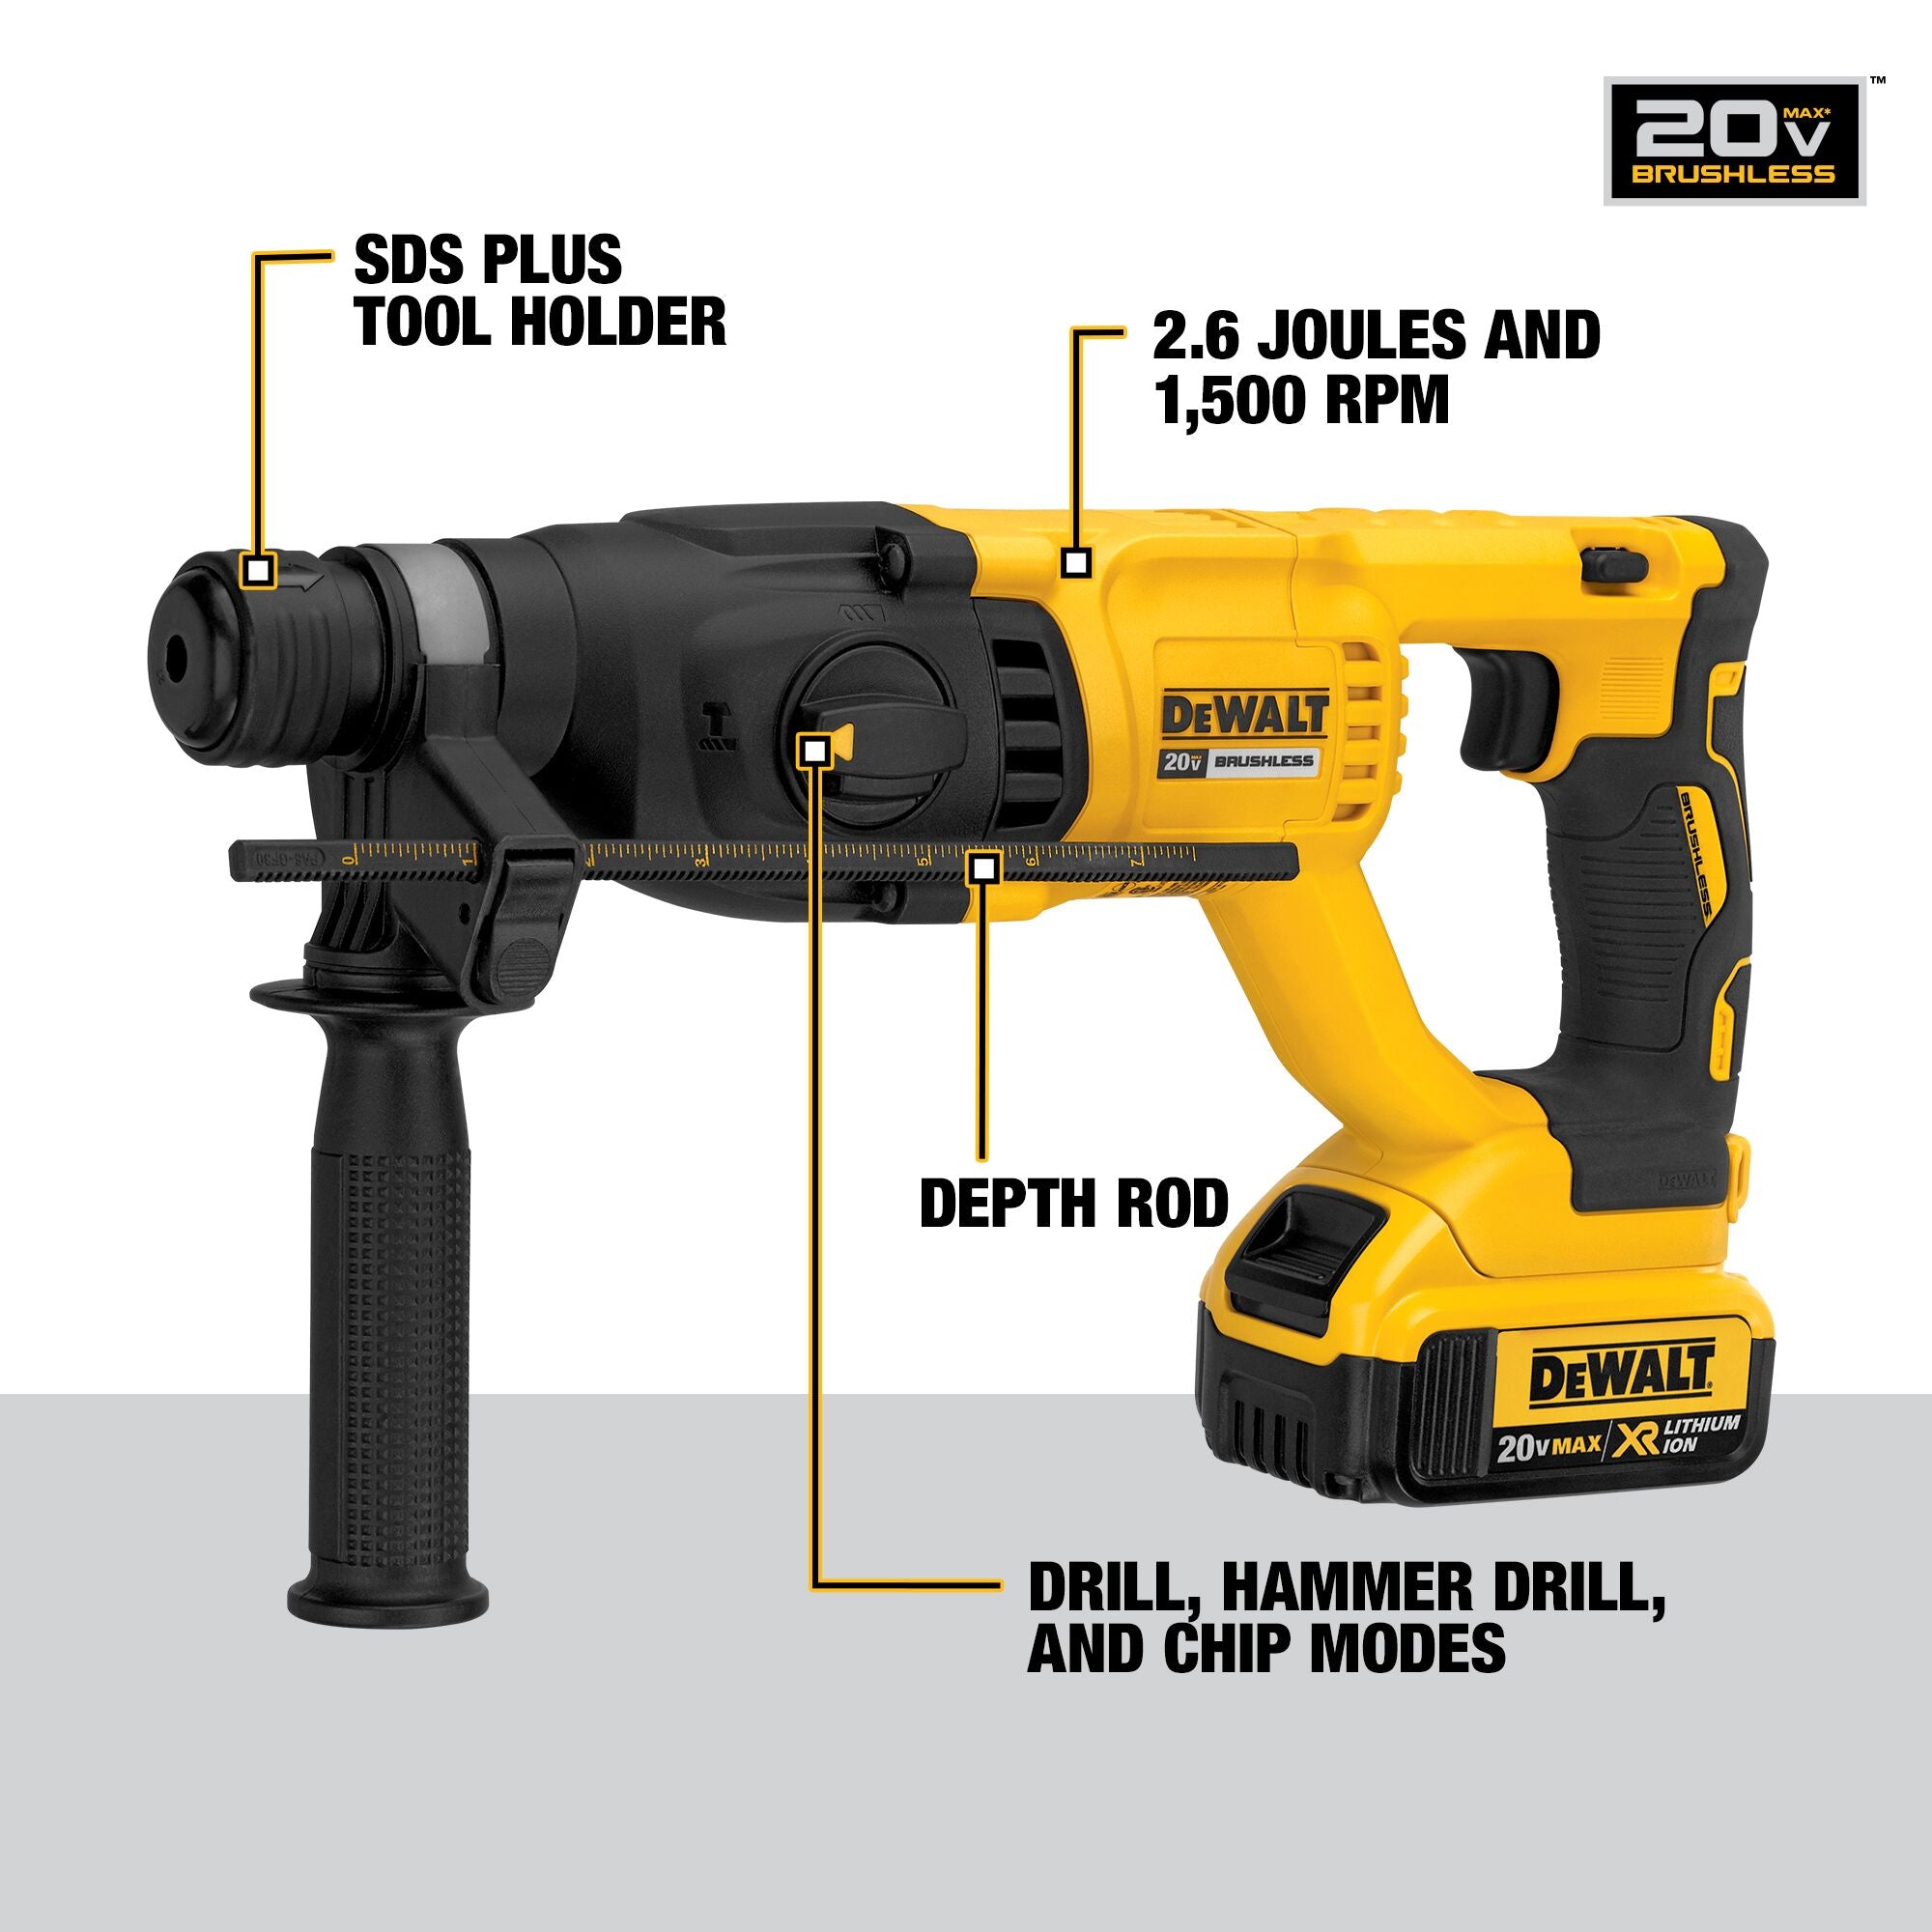 DeWALT DCH133M2 Hammer Drill SDS Plus 1 1/8" 20 Volt Tool with Bag, Two DCB204 Batteries and a Charger